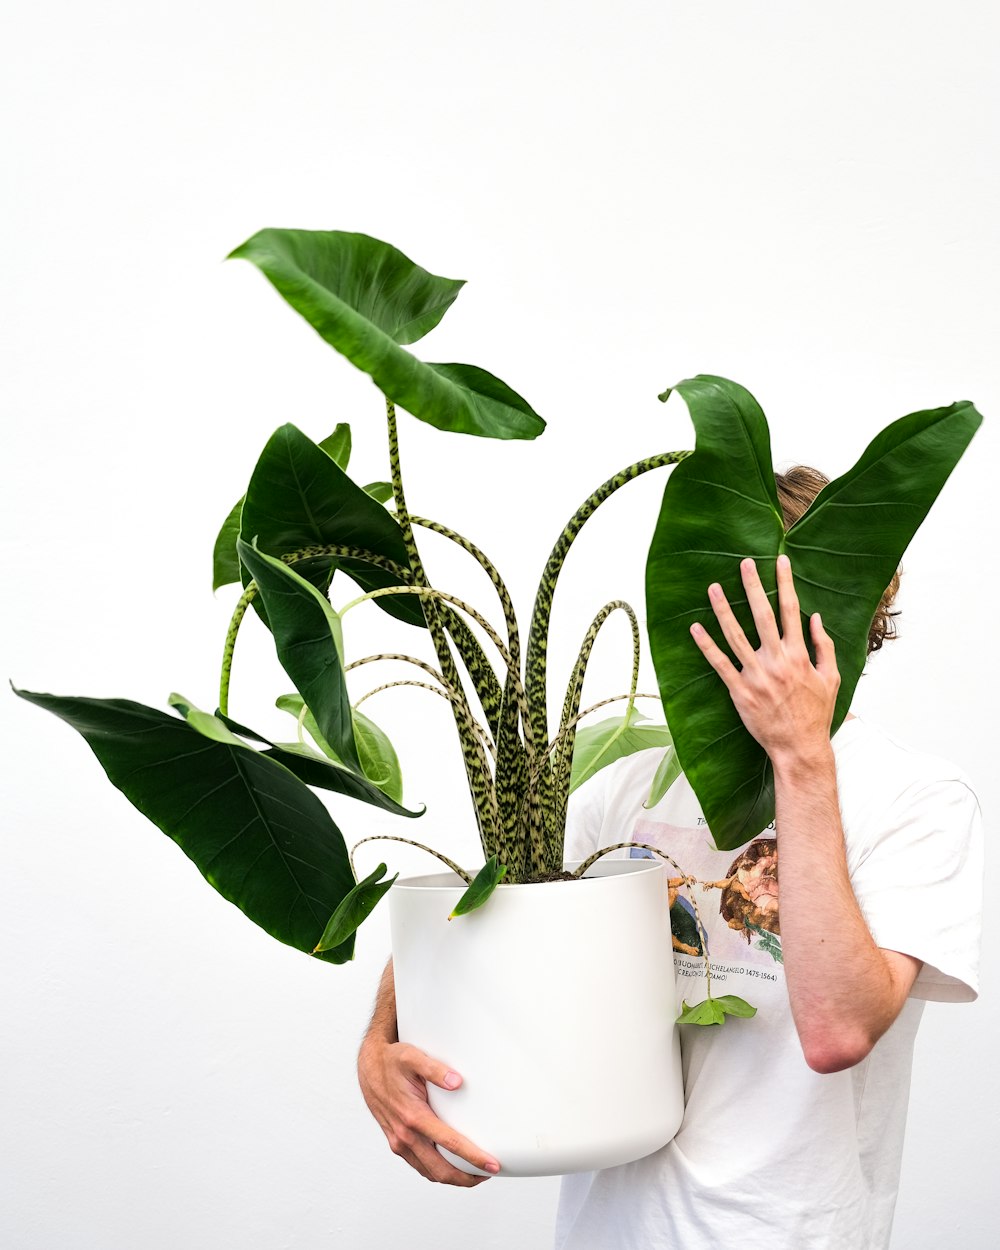 a person holding a potted plant